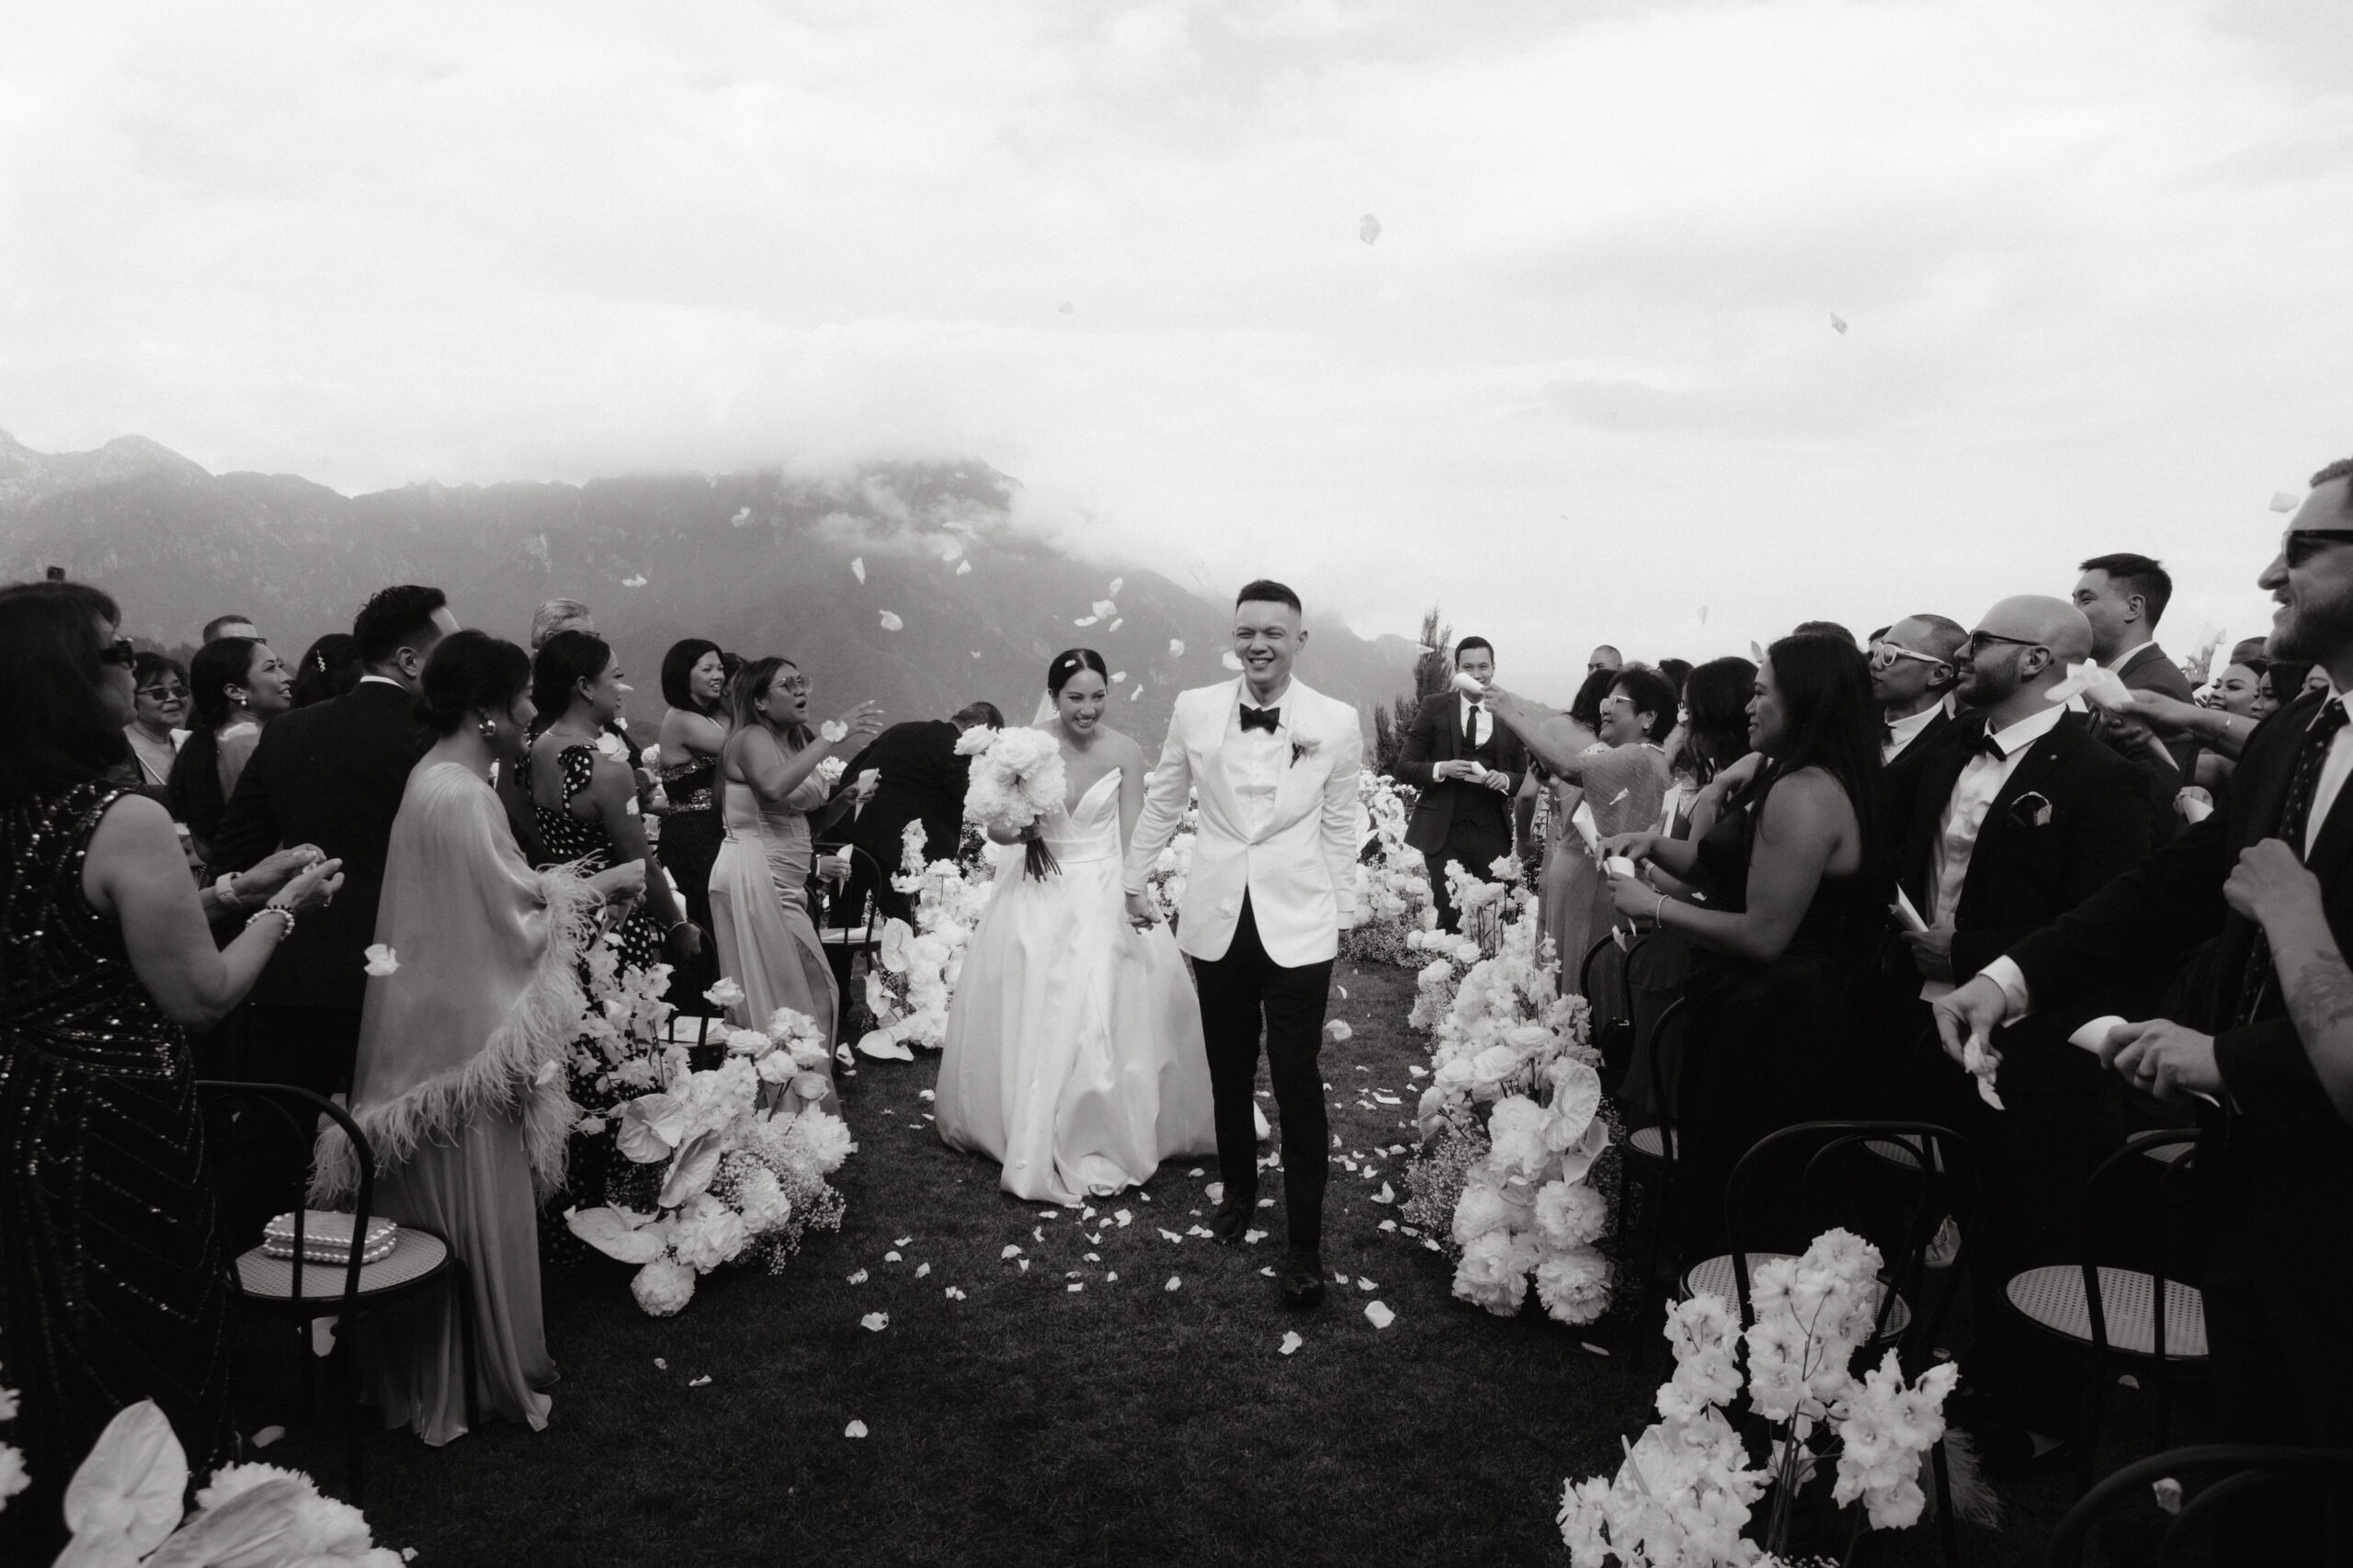 In a timeless black and white photo, the bride and groom joyfully exit their ceremony, bathed in white rose petals. Cheers from guests surround them against the breathtaking backdrop of the Amalfi Coast, with clouds hovering over majestic mountains. A moment of pure happiness captured in a picturesque celebration.